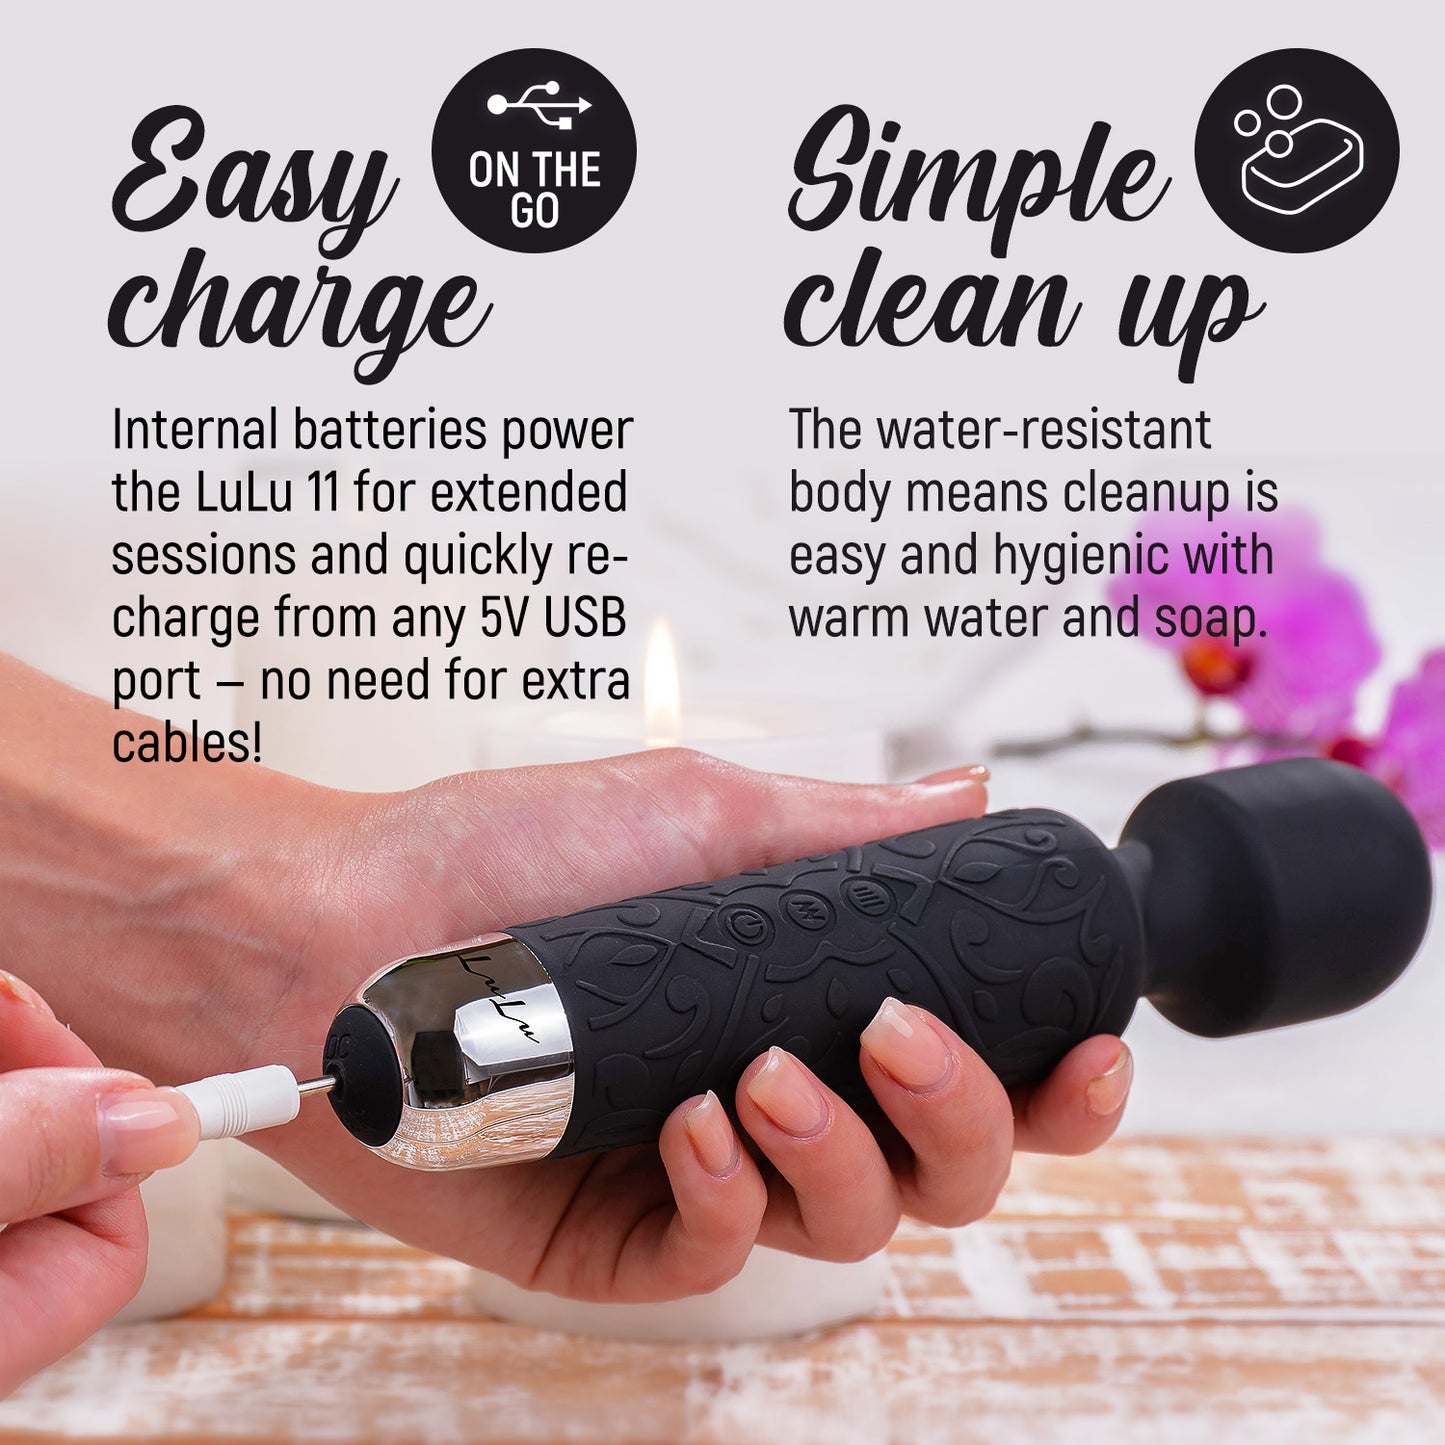 lulu 11 powerful handheld electric back massager for women - strong personal magic massage for sports recovery, muscle aches, & body pain - 20 patterns & 5 speeds